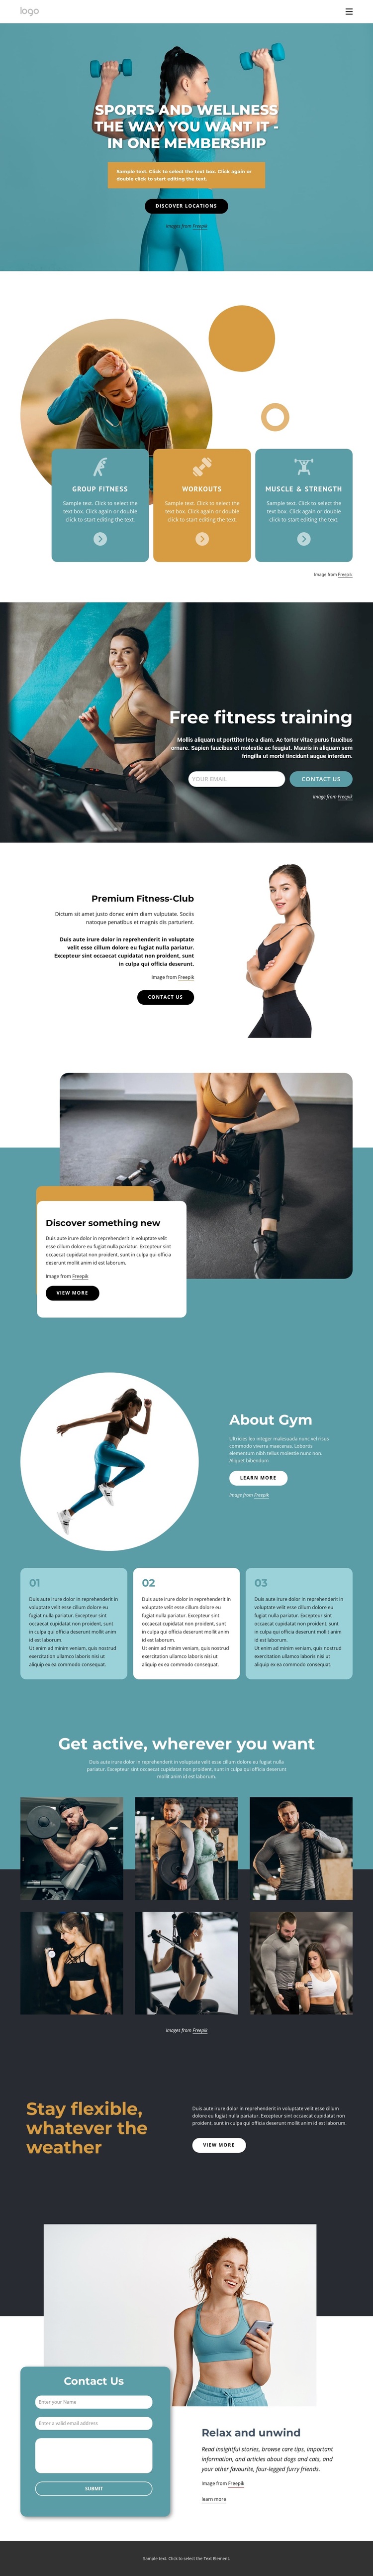 Workout anywhere with one membership Template